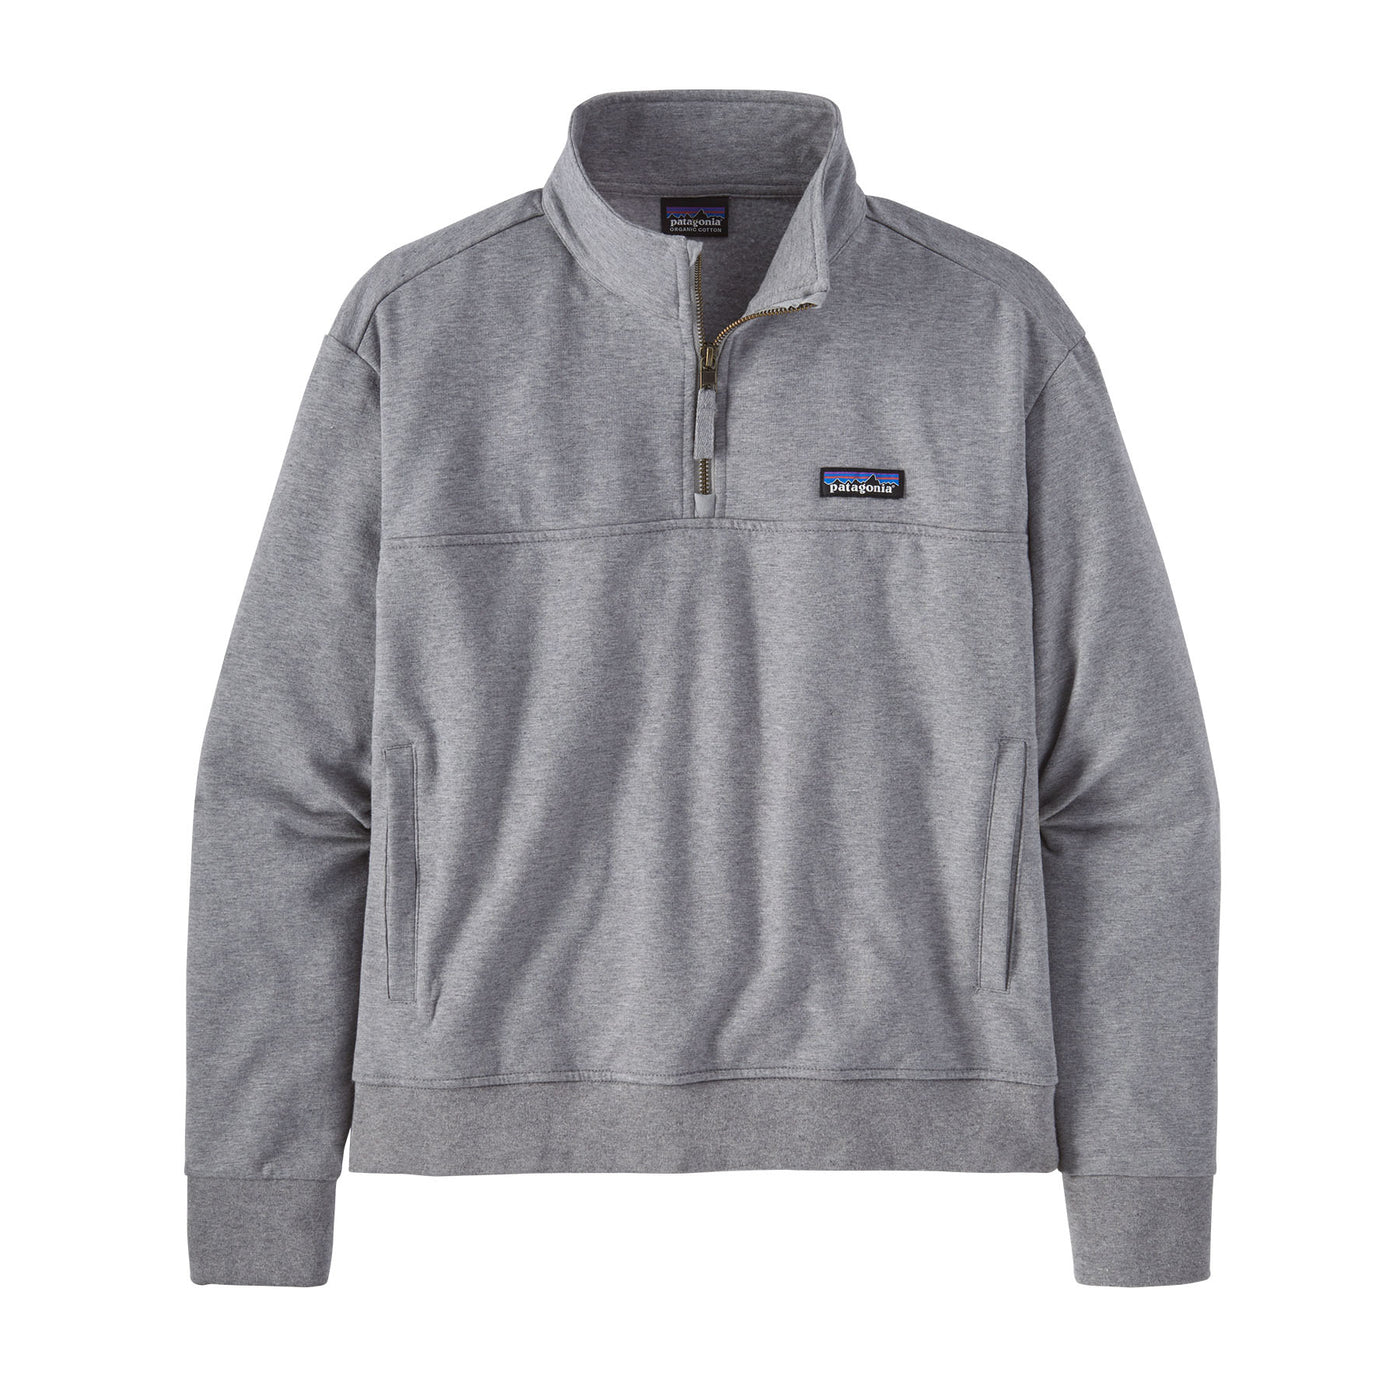 PATAGONIA Women's Ahnya Pullover alt Grey SGRY / S